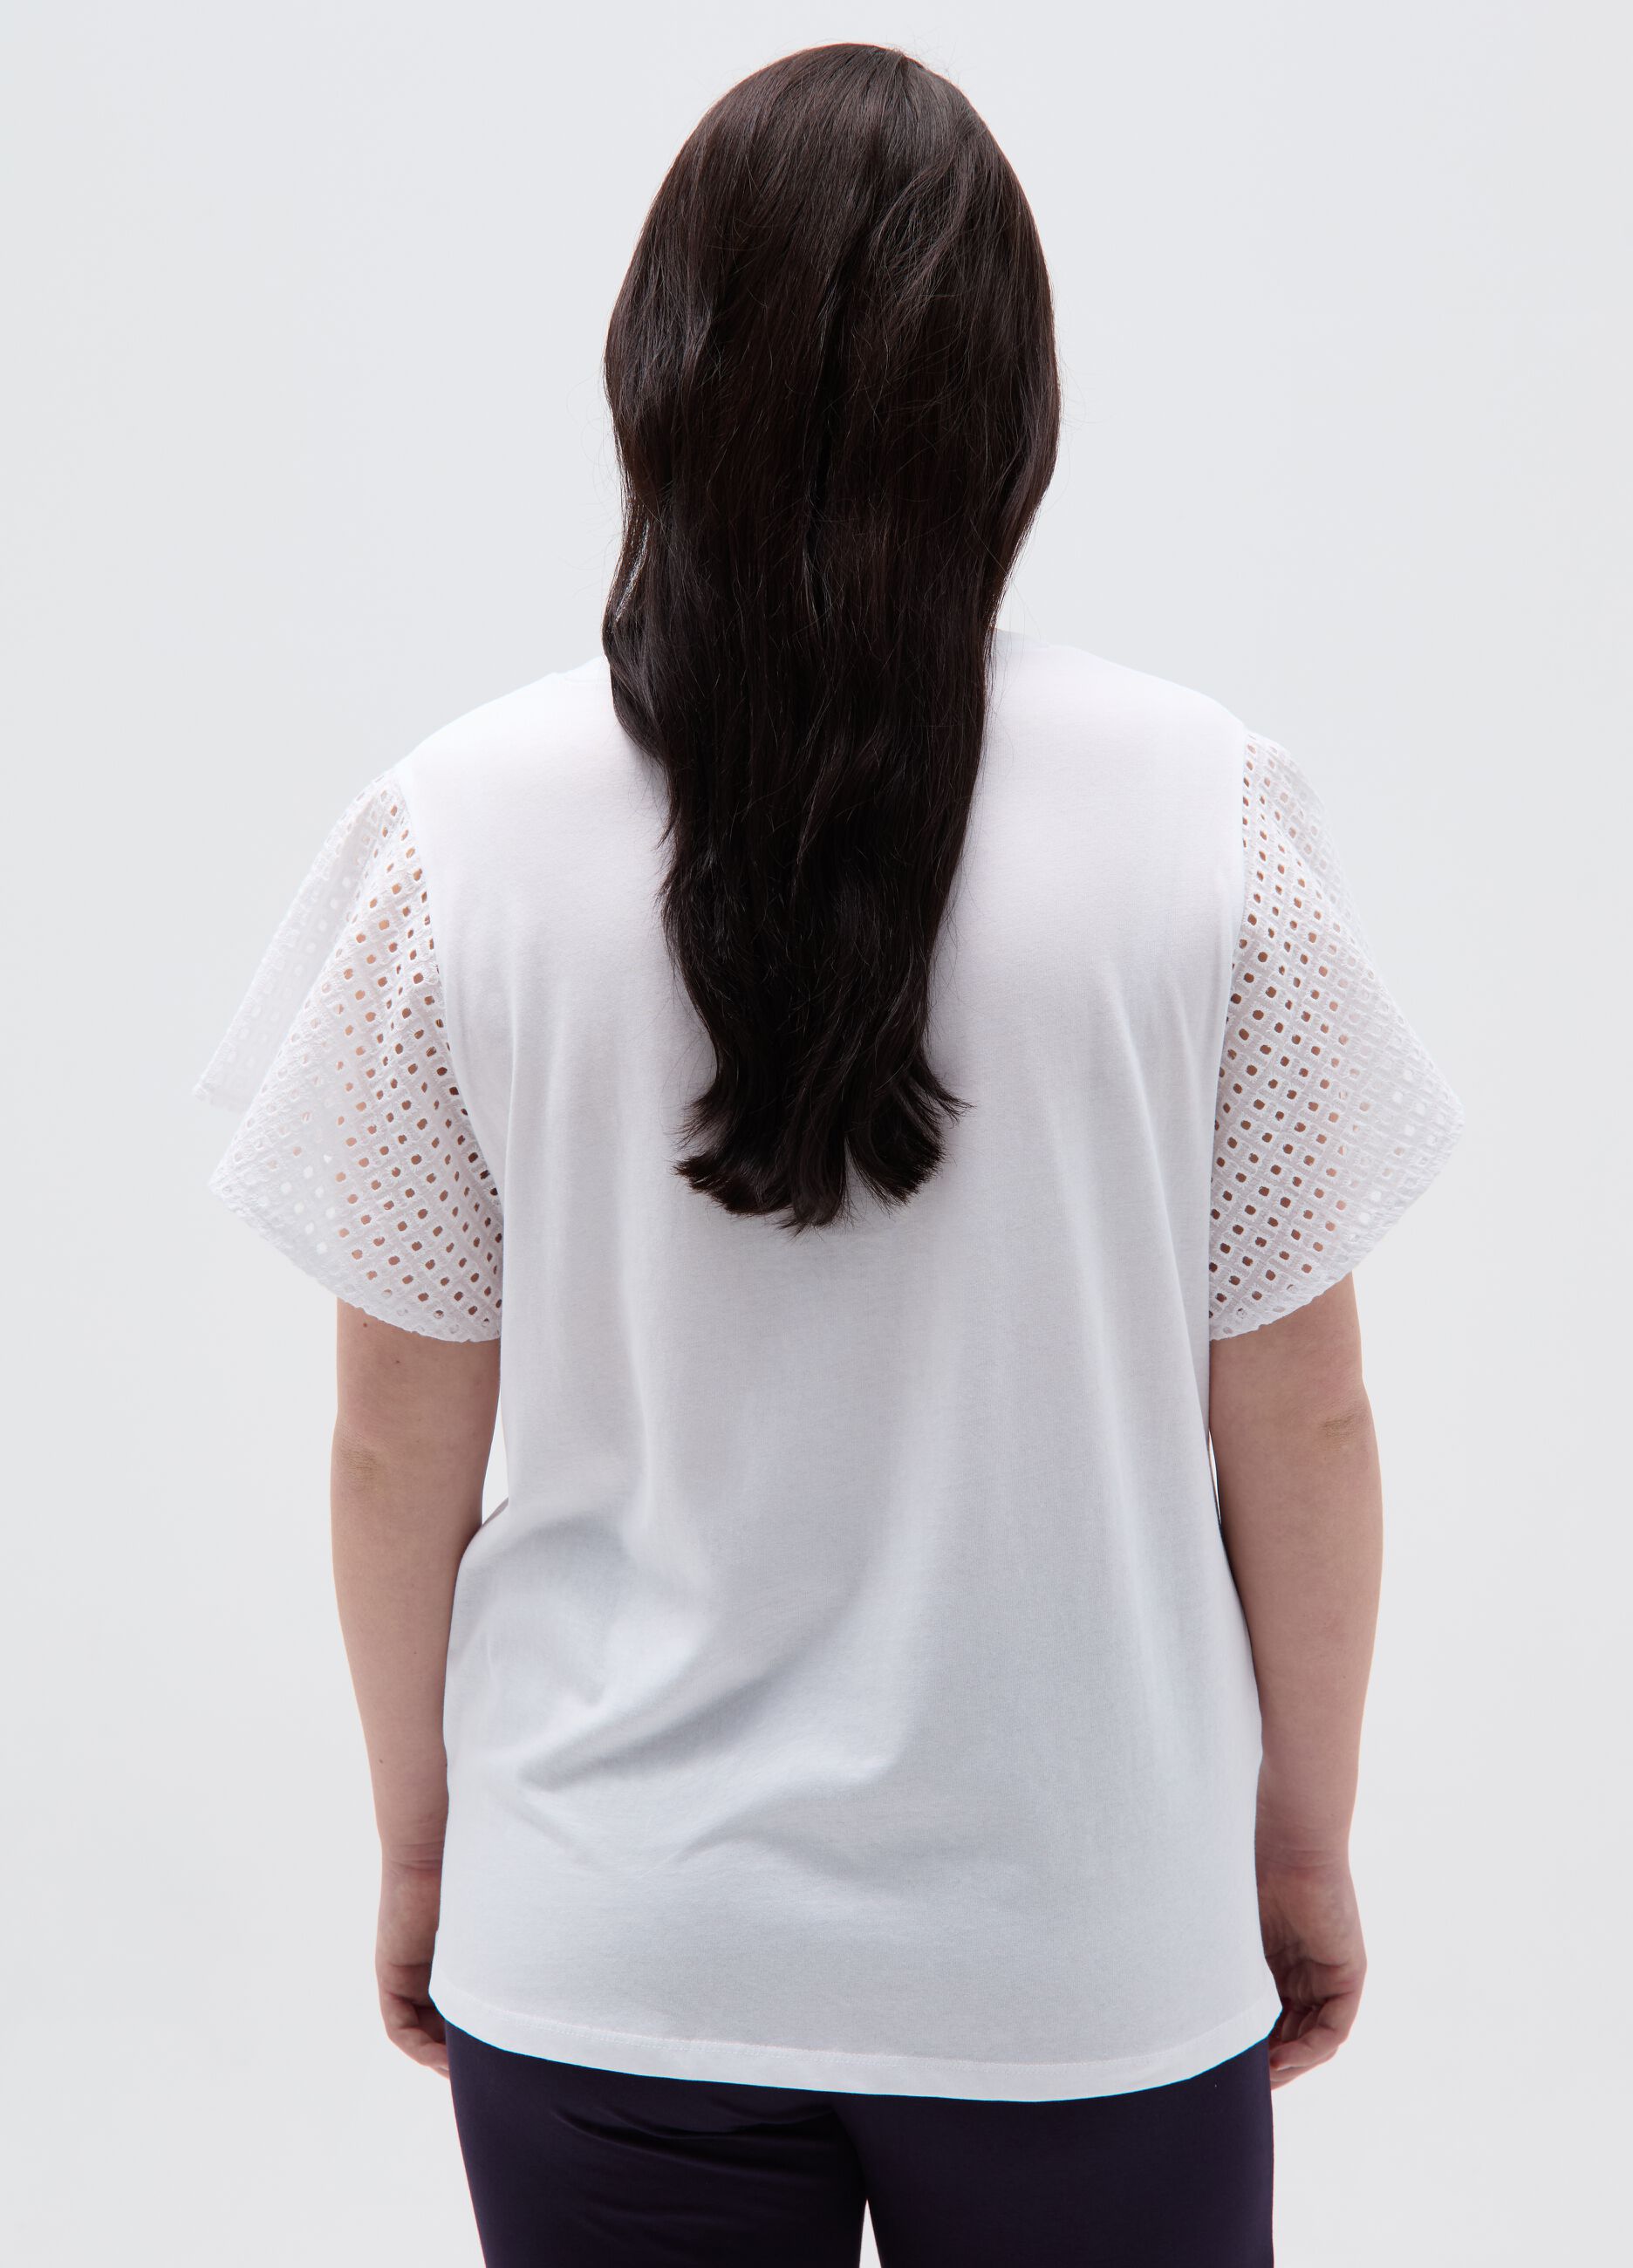 Curvy T-shirt and butterfly sleeves in broderie anglaise